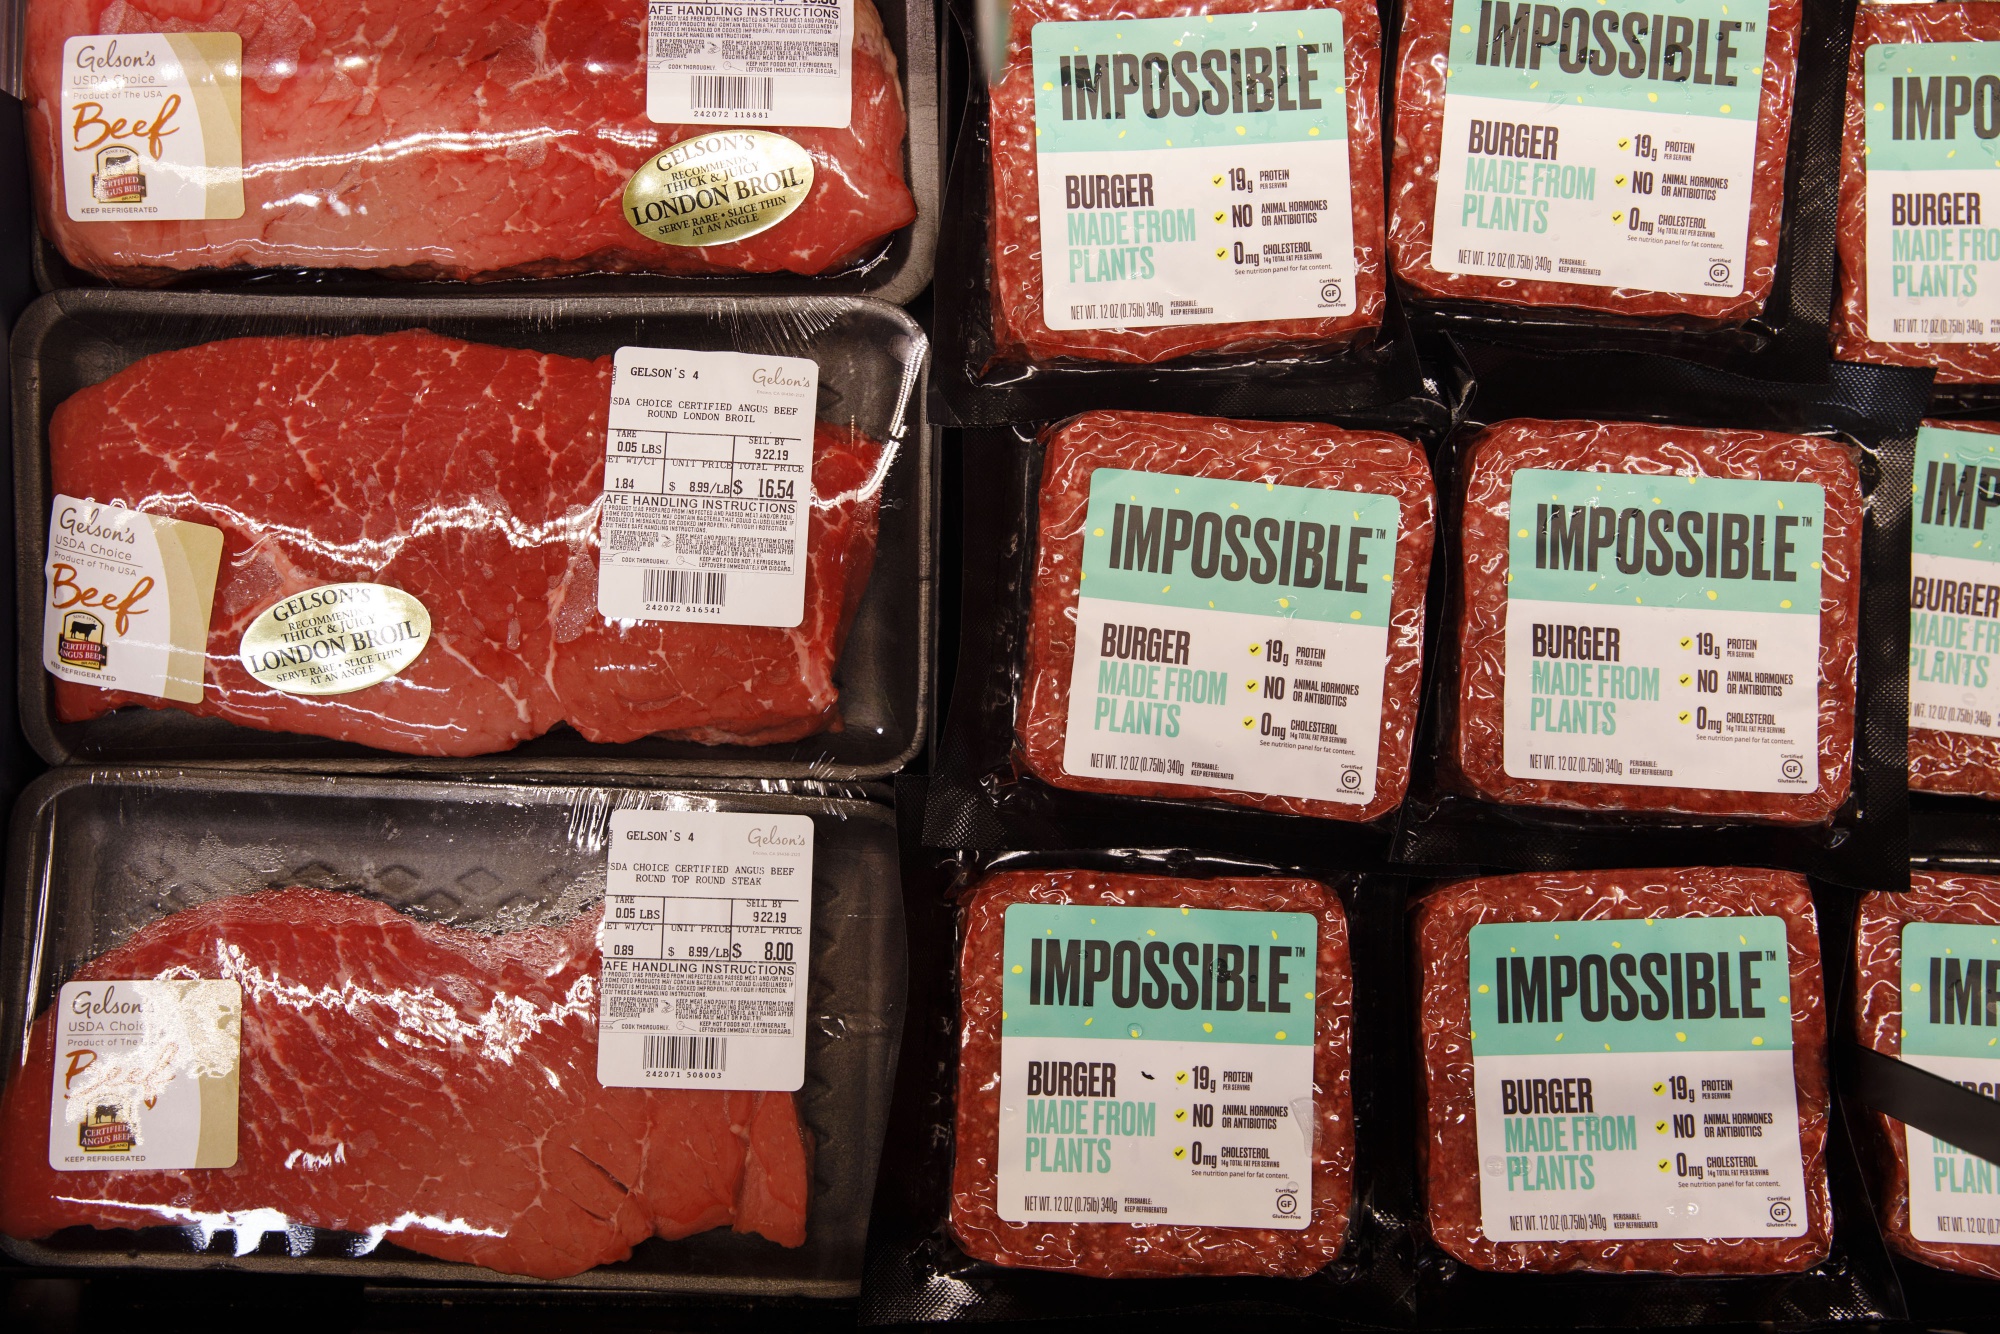 How sustainable are fake meats?, Health